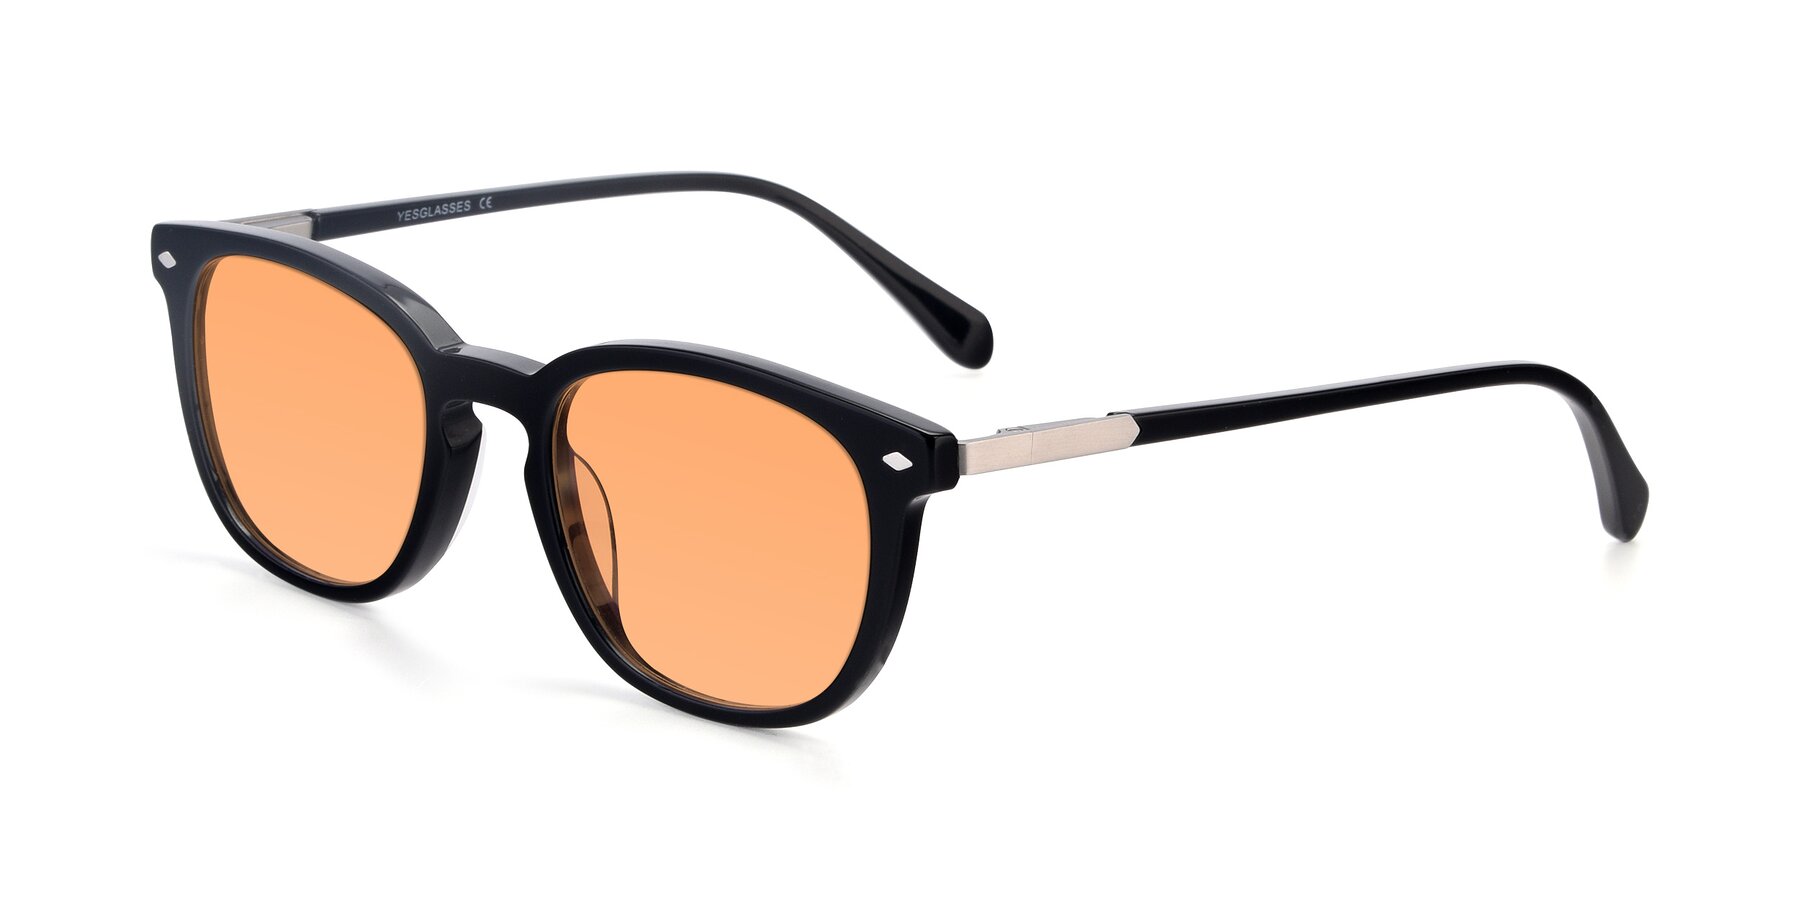 Angle of 17578 in Black with Medium Orange Tinted Lenses